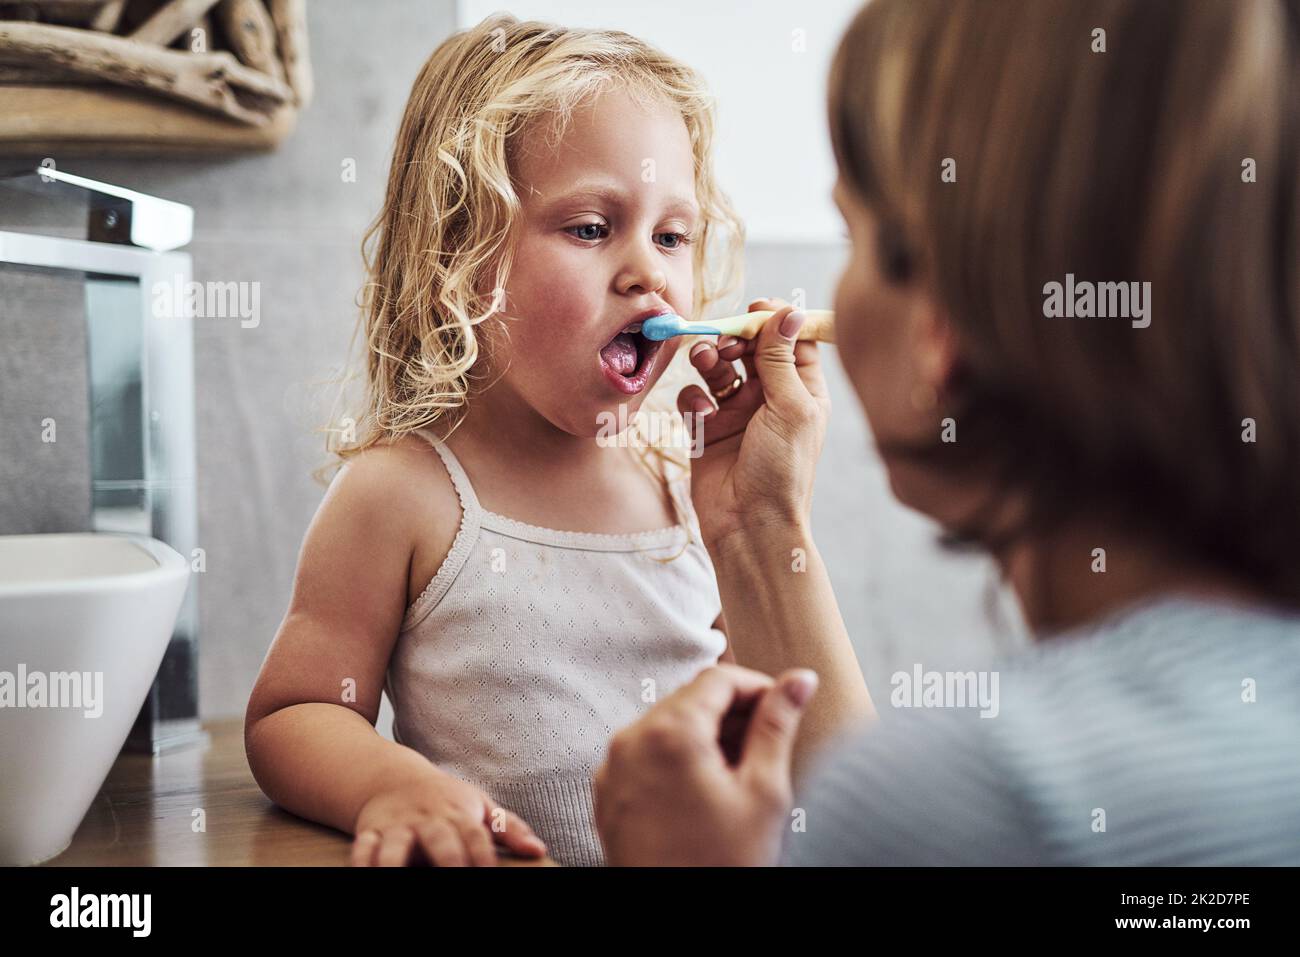 Am I doing it right Mom. Cropped shot of an adorable little girl standing and getting help from her mother while brushing her teeth. Stock Photo